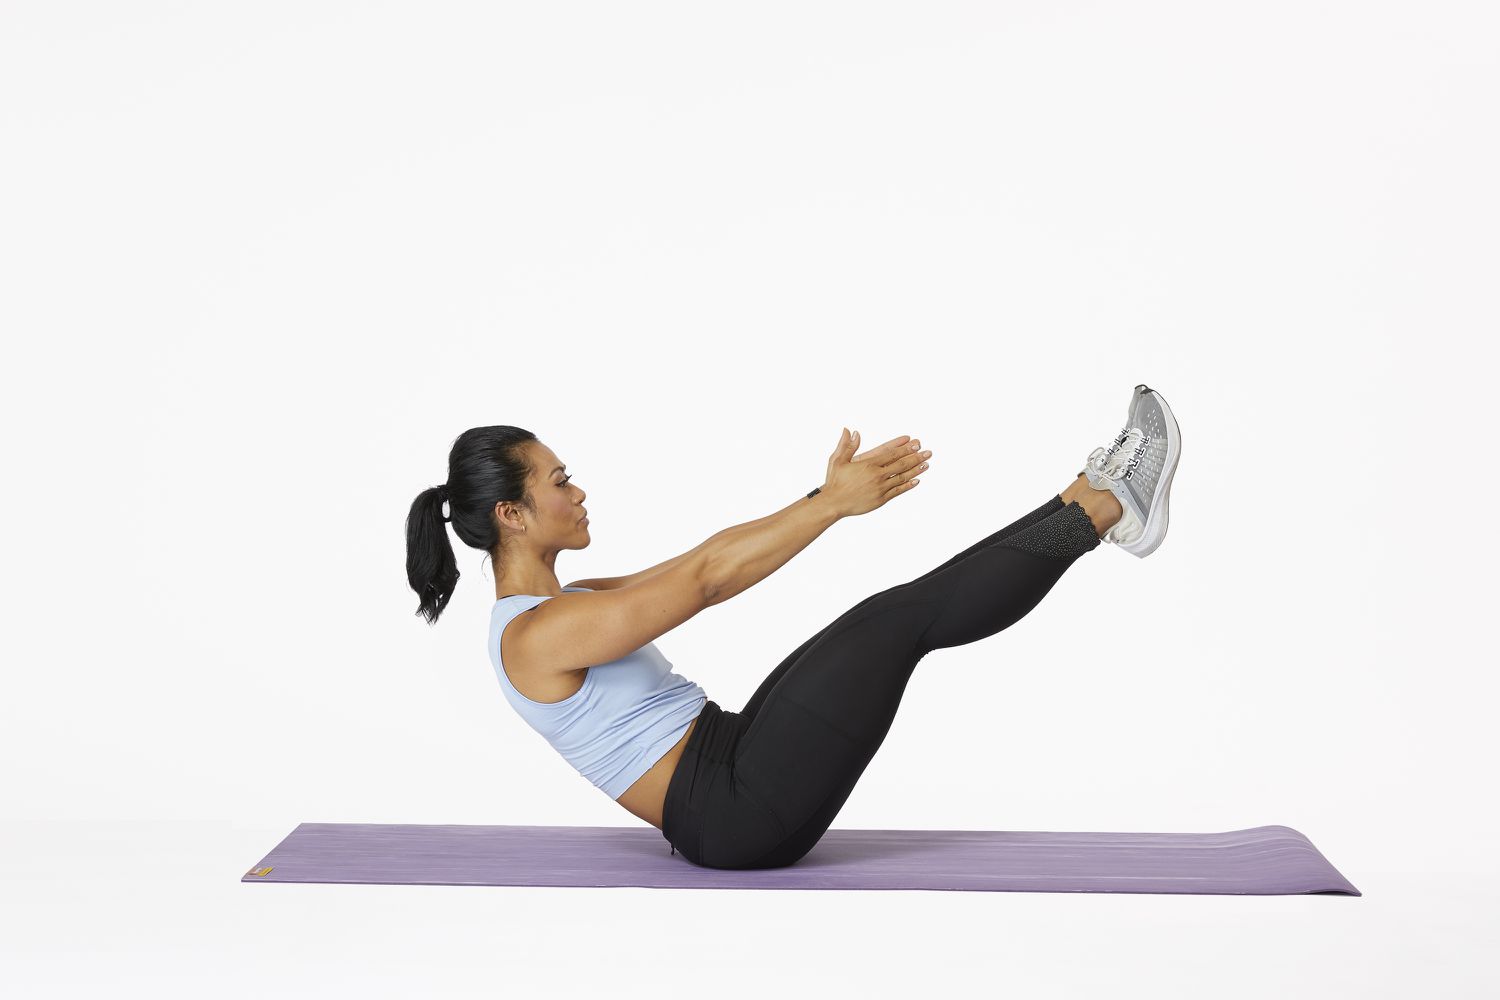 Woman on yoga mat doing a v-sit exercise